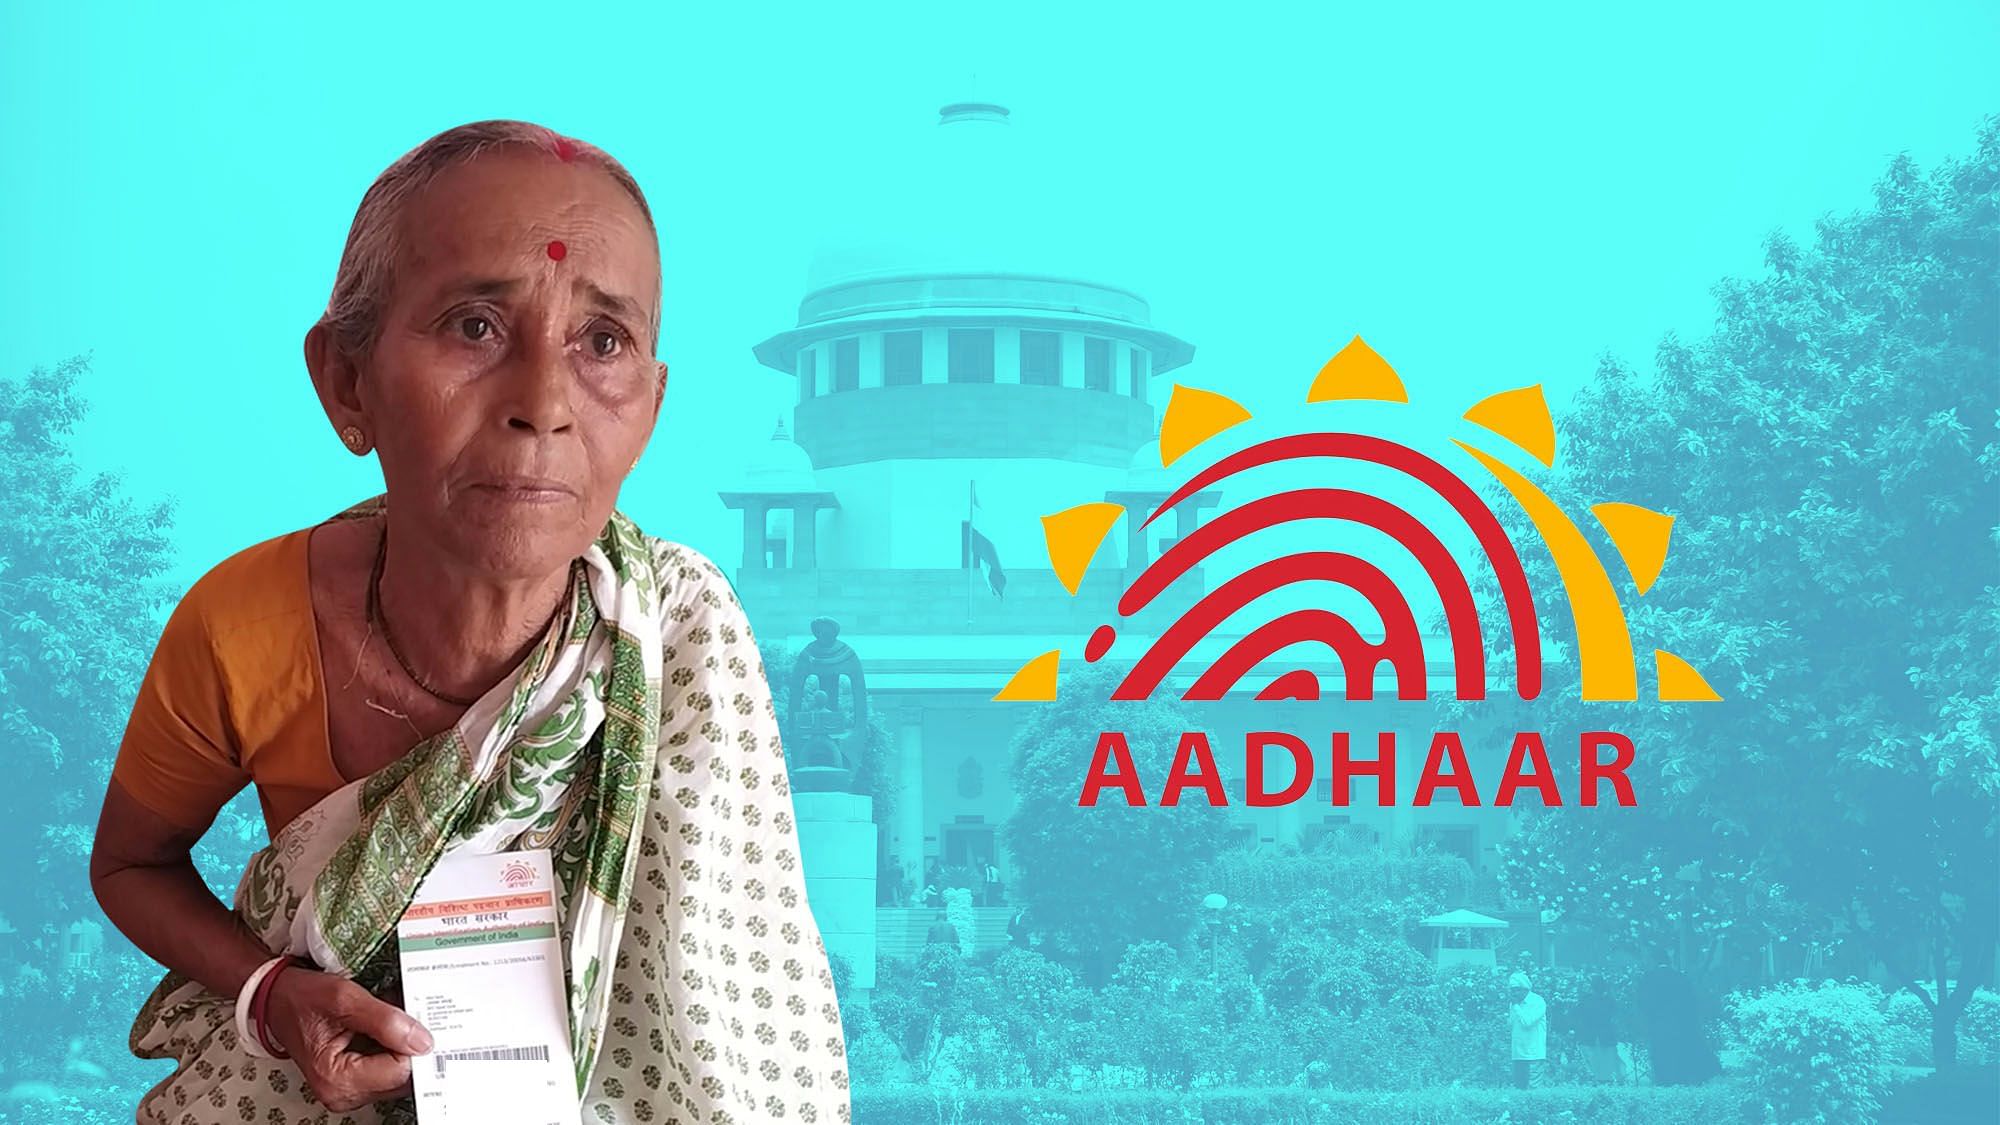 A lady in West Singhbhum, Jharkhand, who was denied her pension because of an Aadhaar authentication failure.